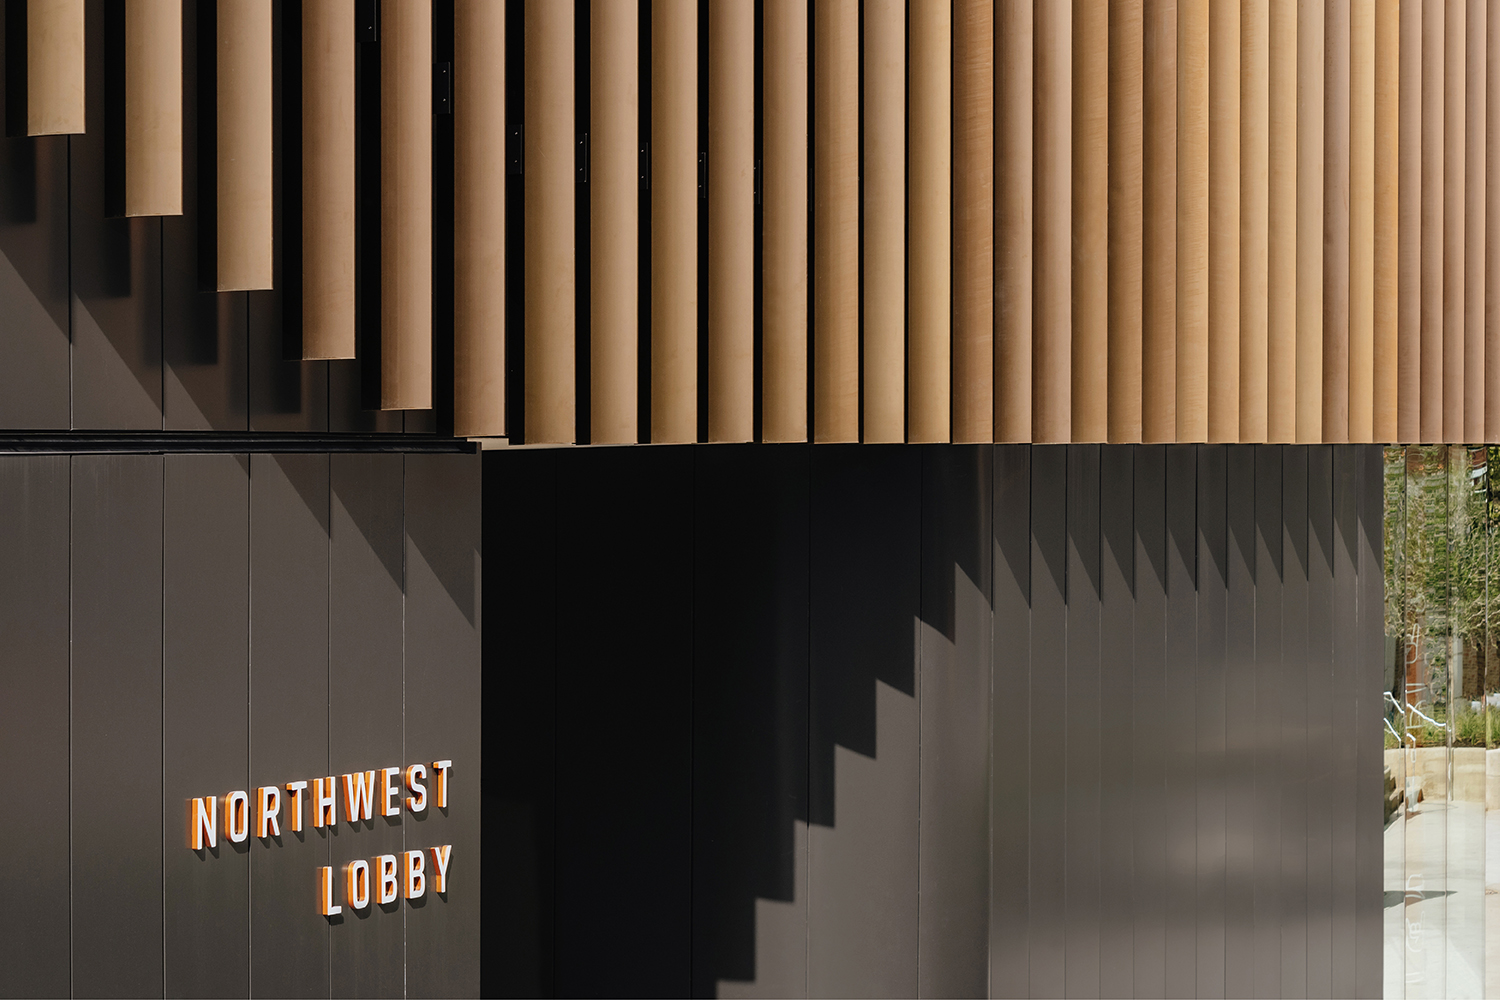 Warm wood tones and crisp MCM paneling ebb and flow in the interior and exterior of Moody Center